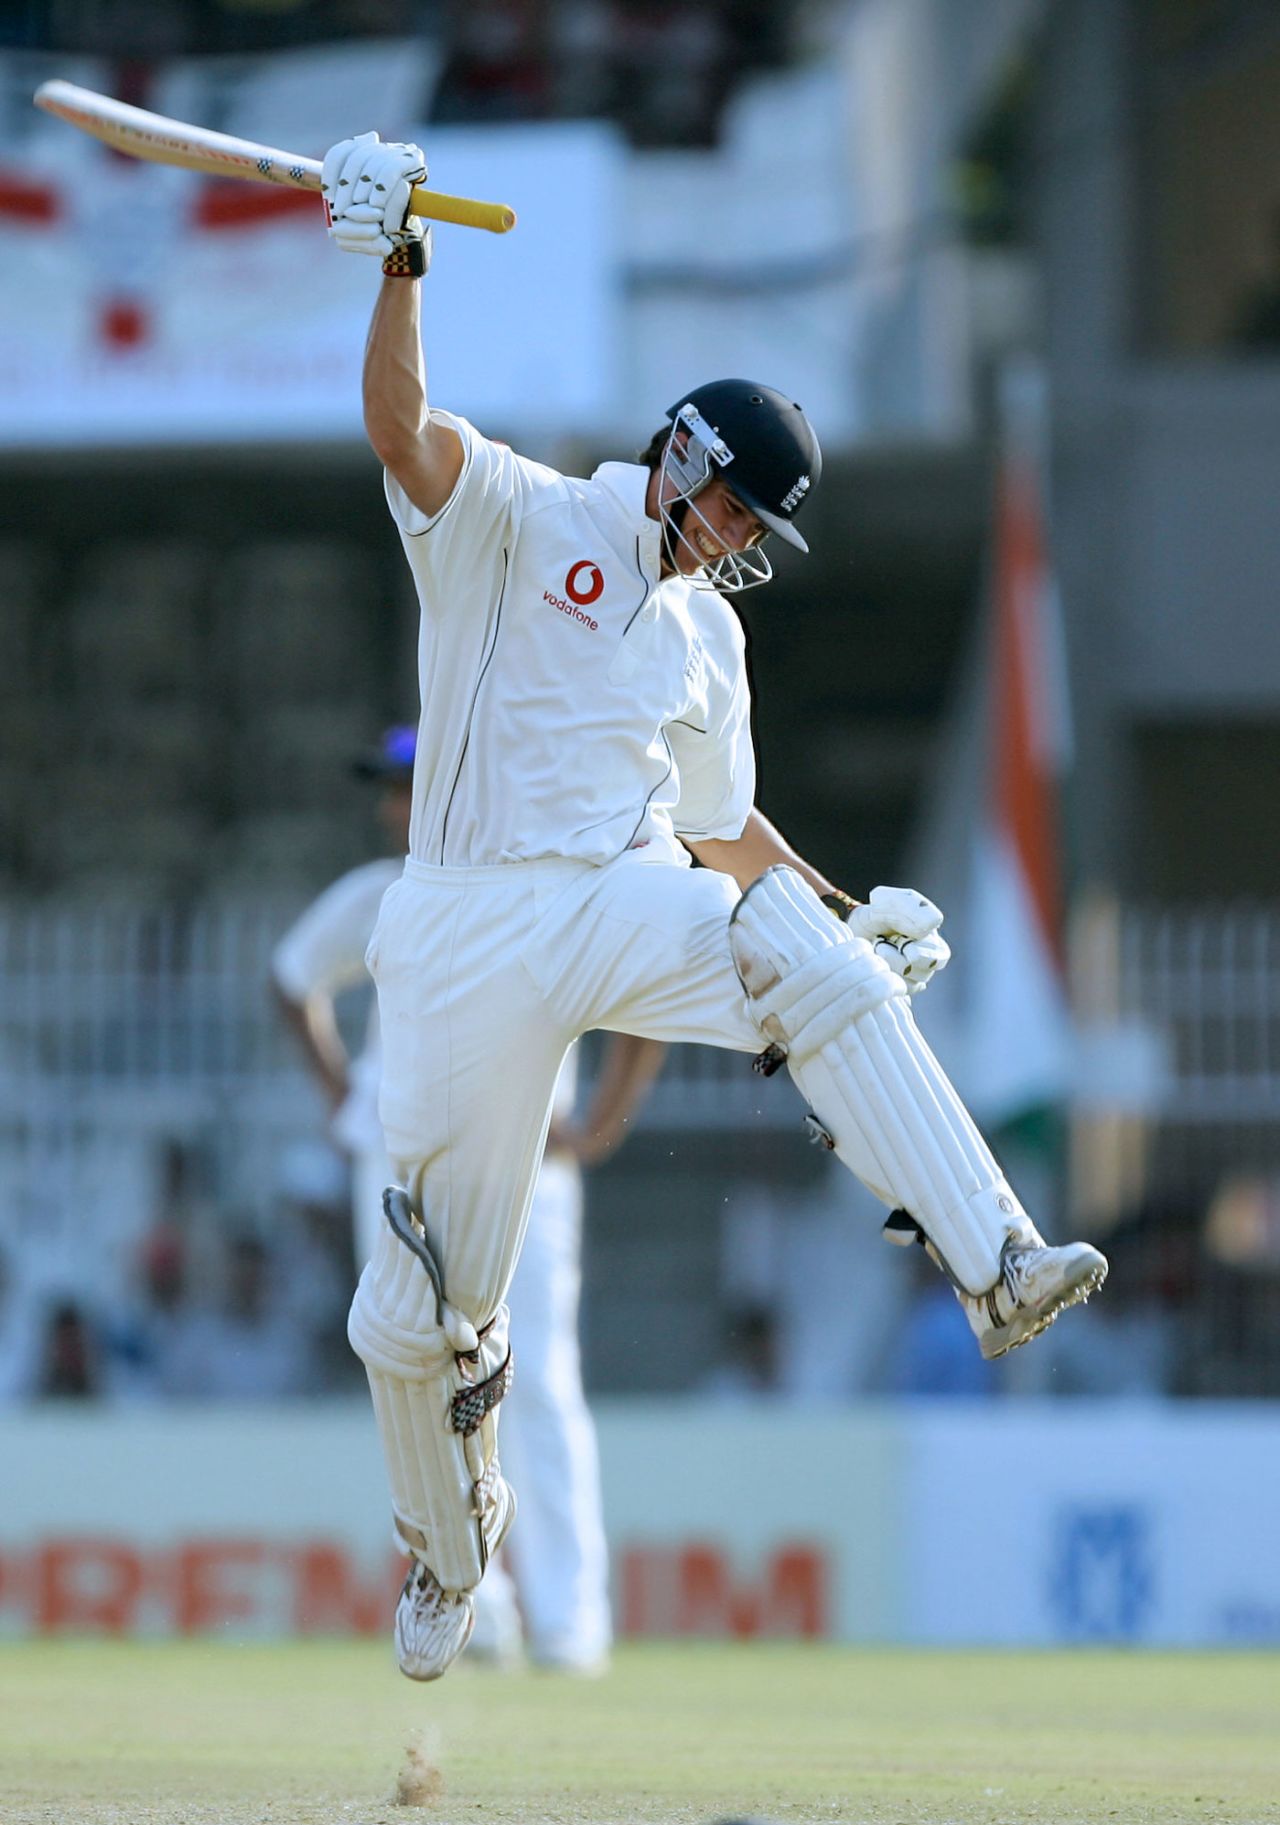 Jumping for joy: Alastair Cook leaps in delight after reaching his century, India v England, 1st Test, Nagpur, March 4, 2006